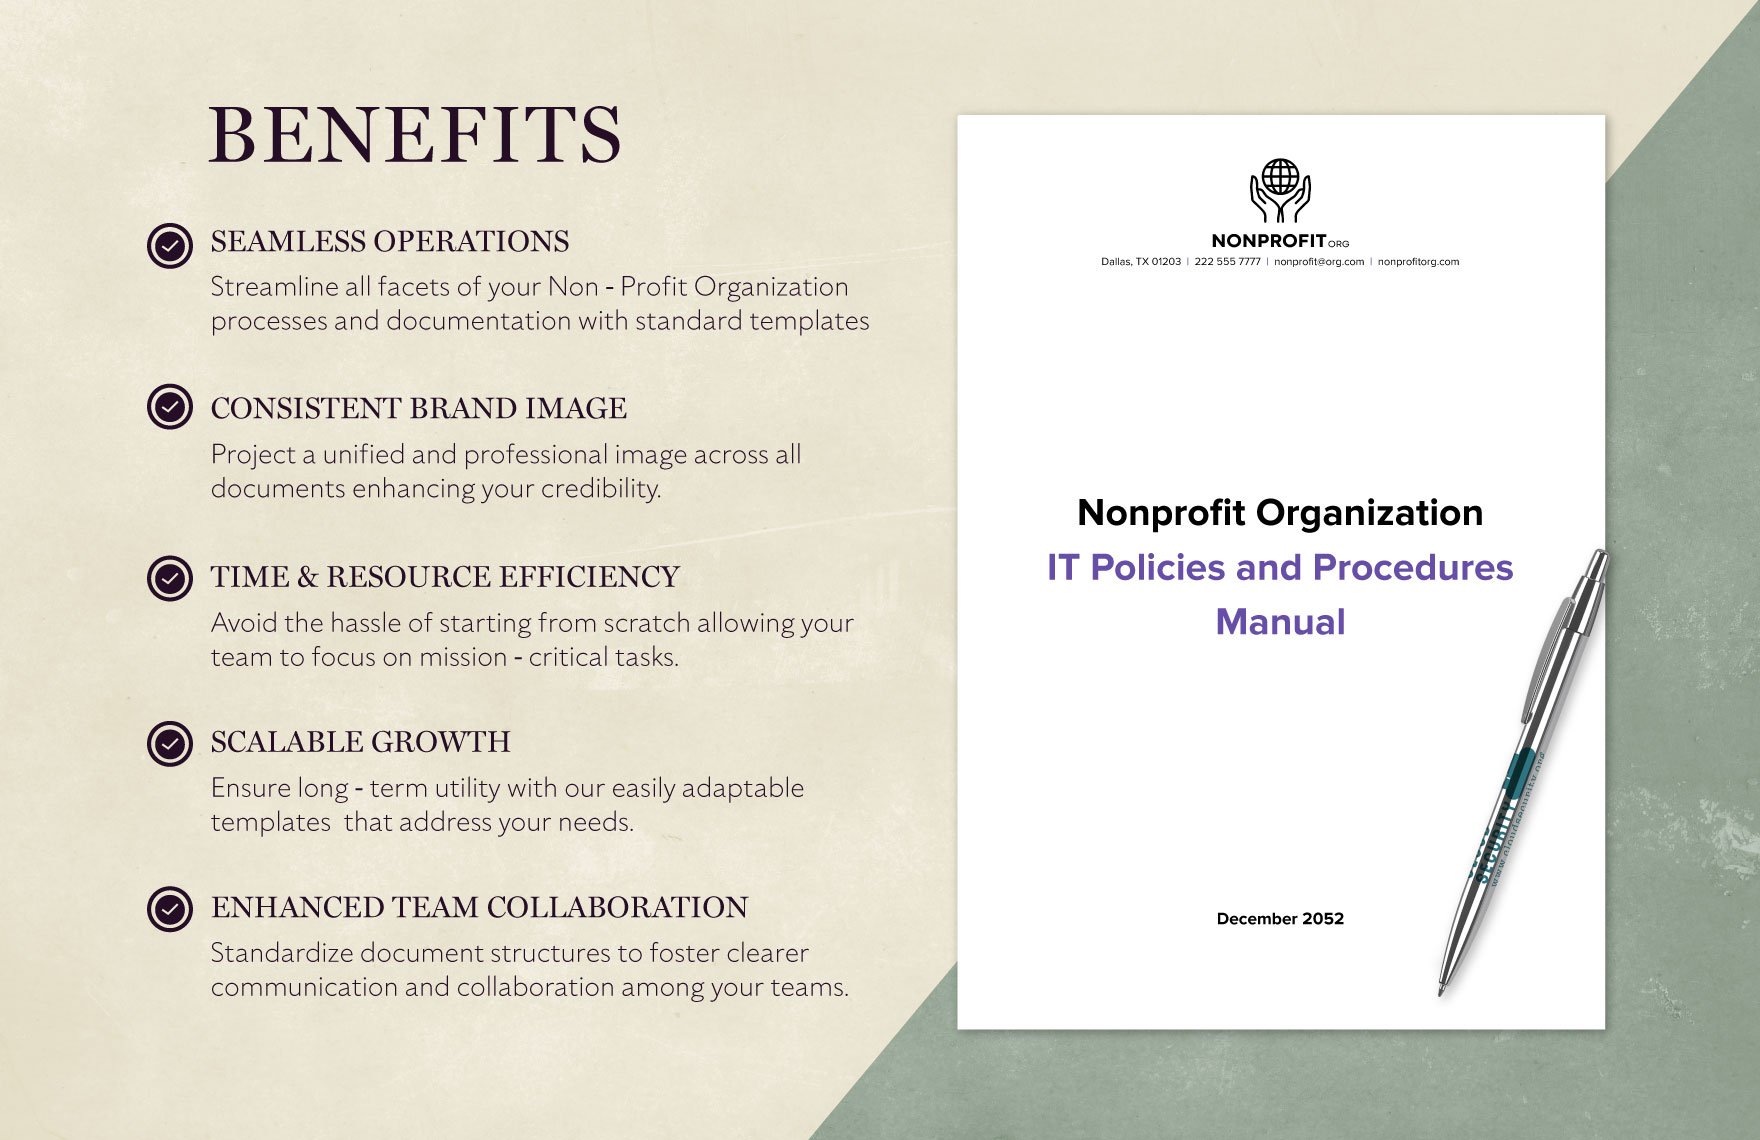 Nonprofit Organization IT Policies and Procedures Manual Template